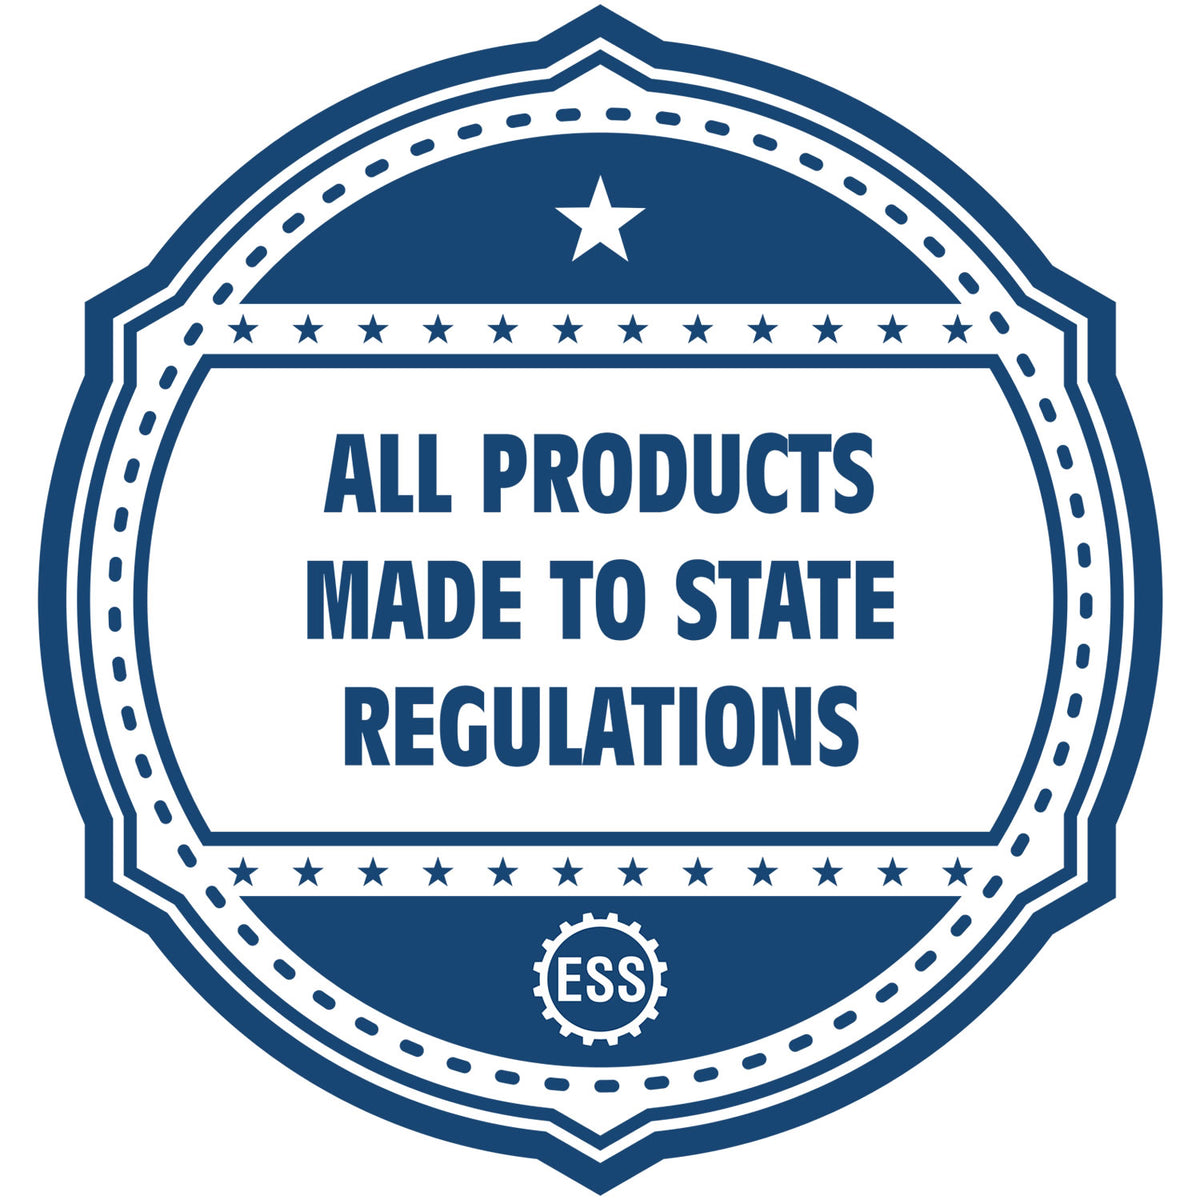 An icon or badge element for the MaxLight Premium Pre-Inked North Carolina State Seal Notarial Stamp showing that this product is made in compliance with state regulations.